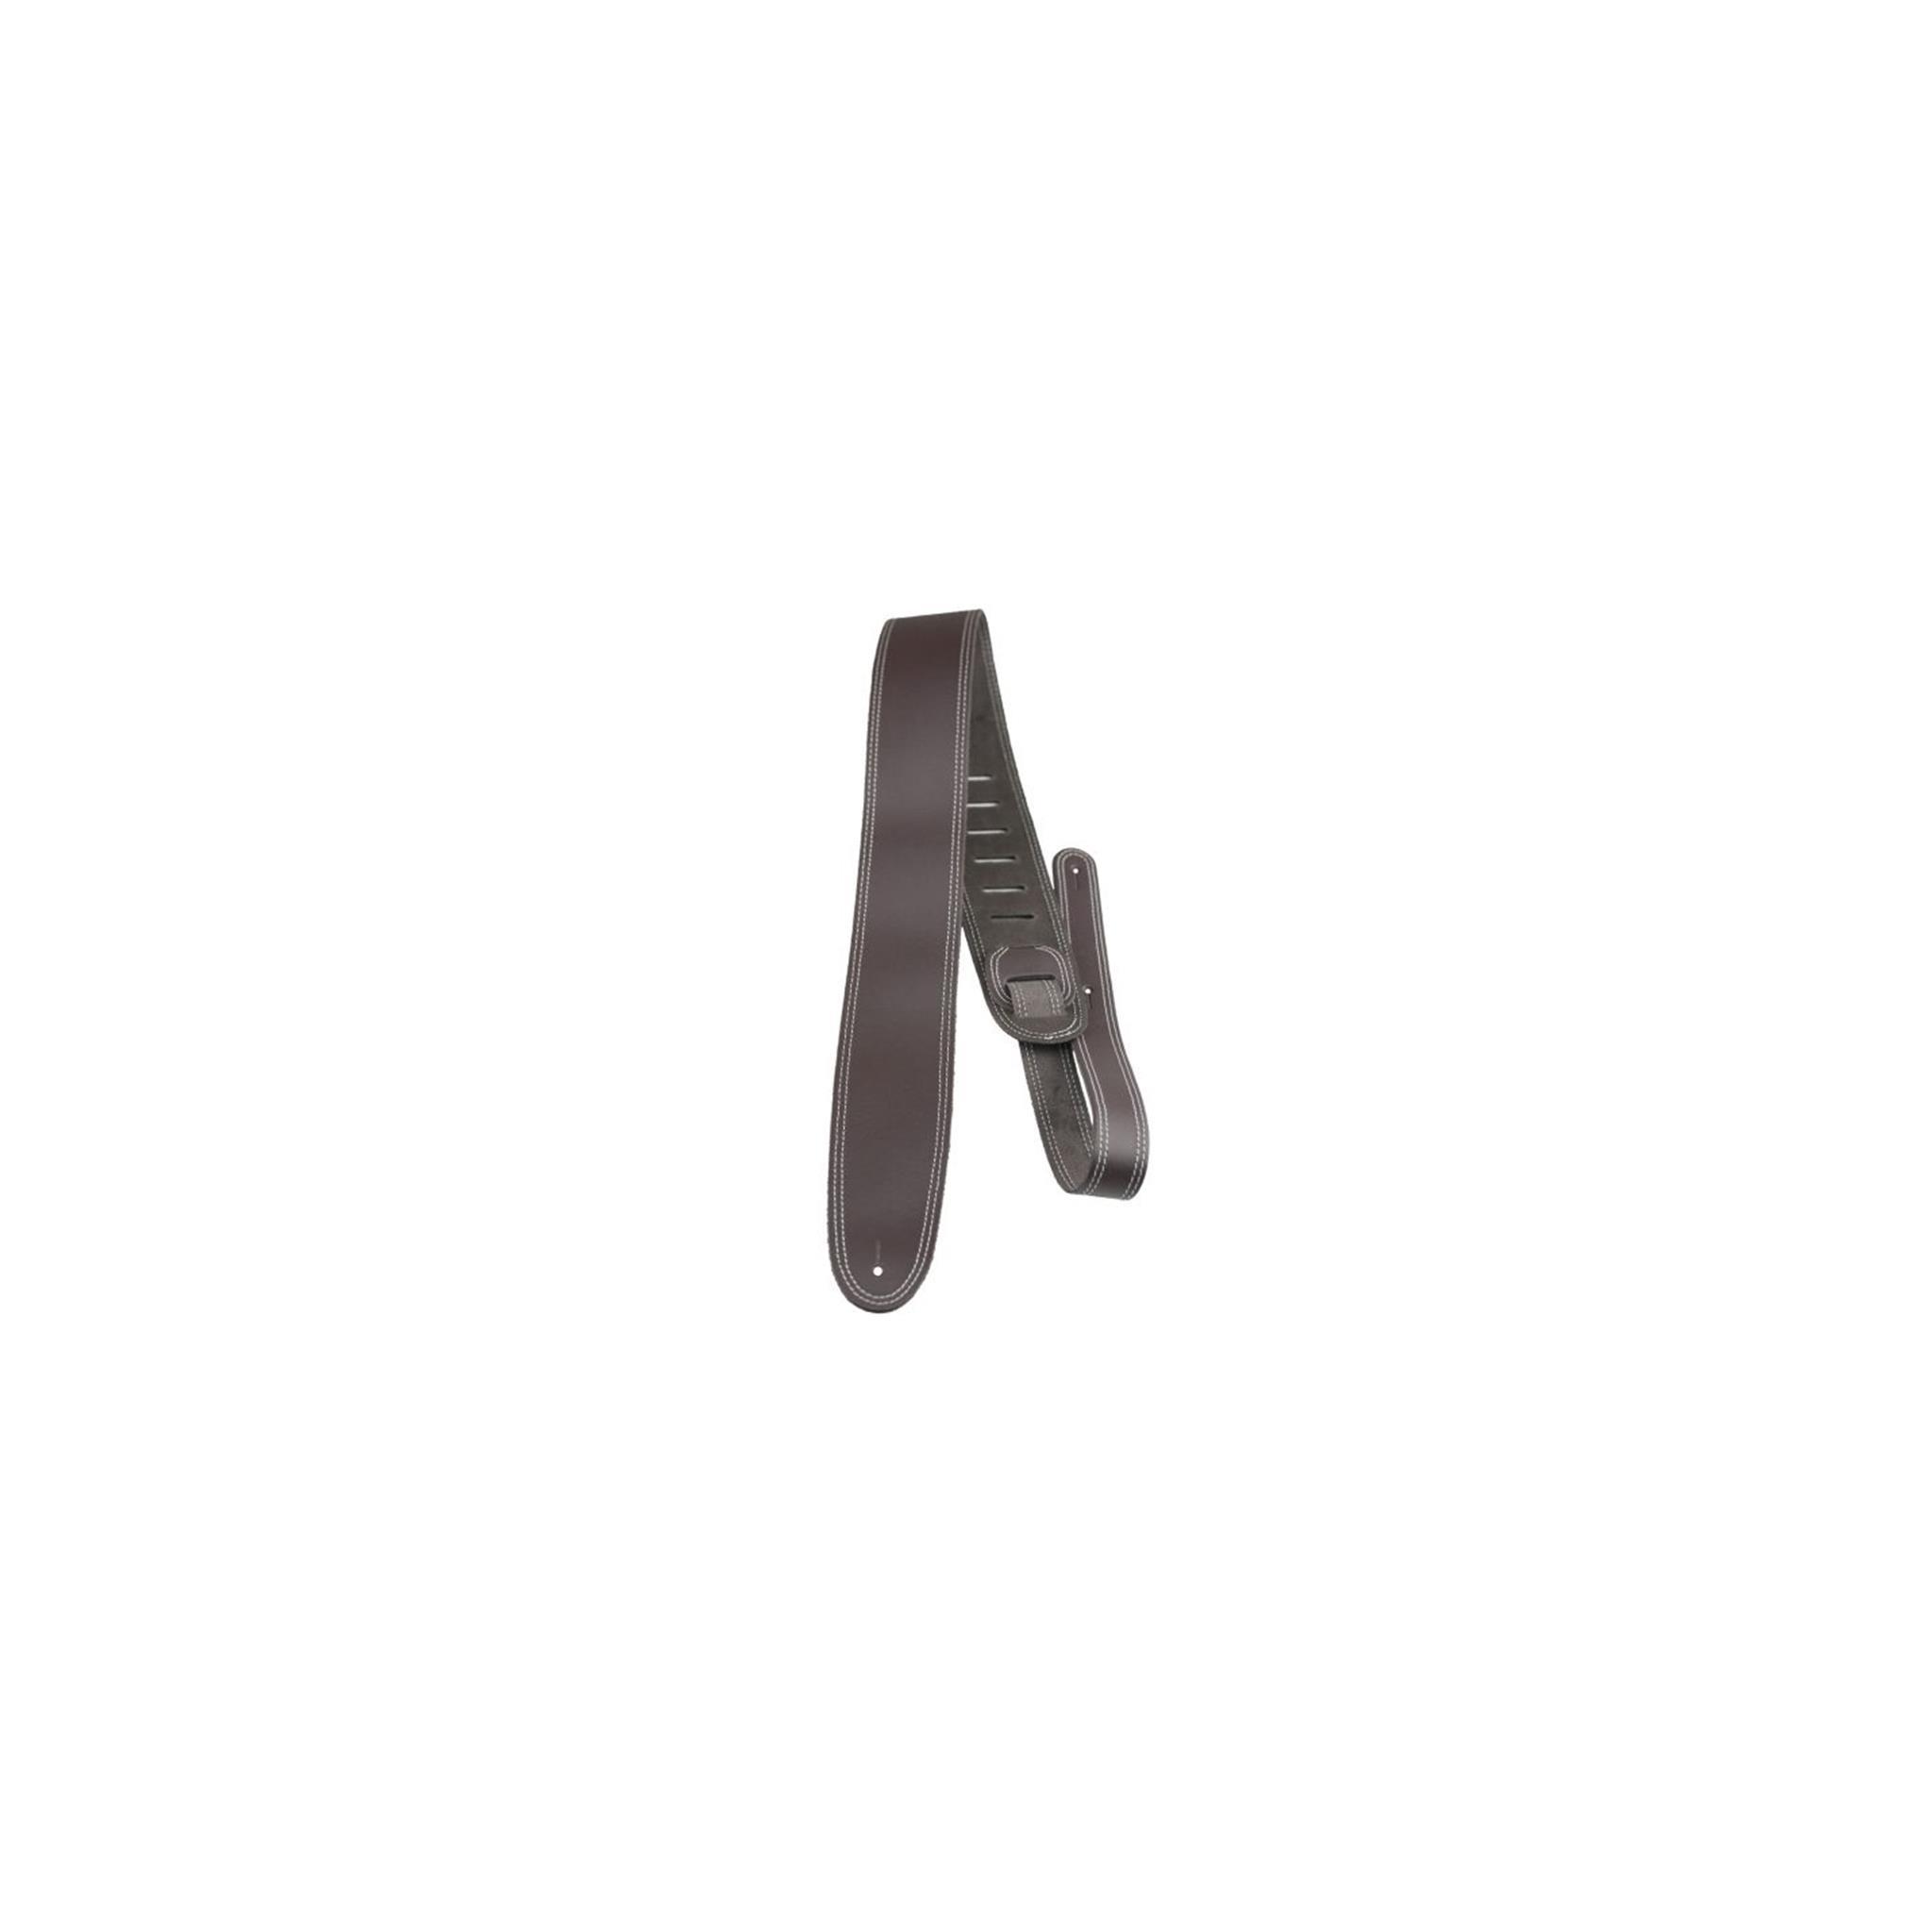 Perri's 2.5" Brown Double Stitched Leather Guitar Strap